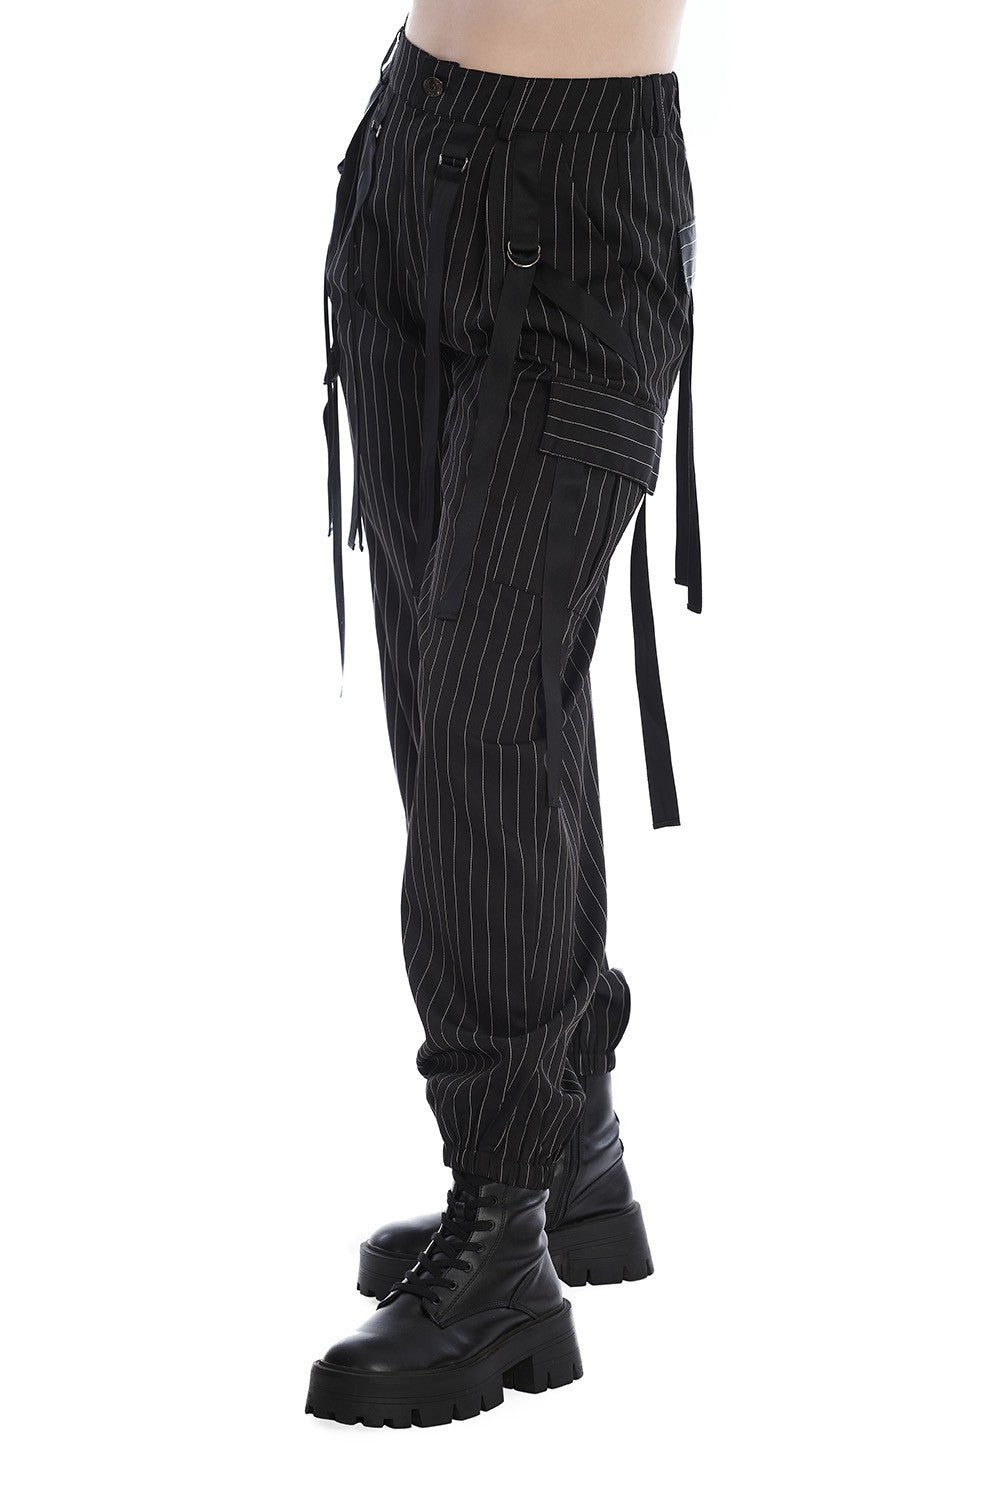 Banned Everlee Pinstripe Harem Gothic Harness Pants